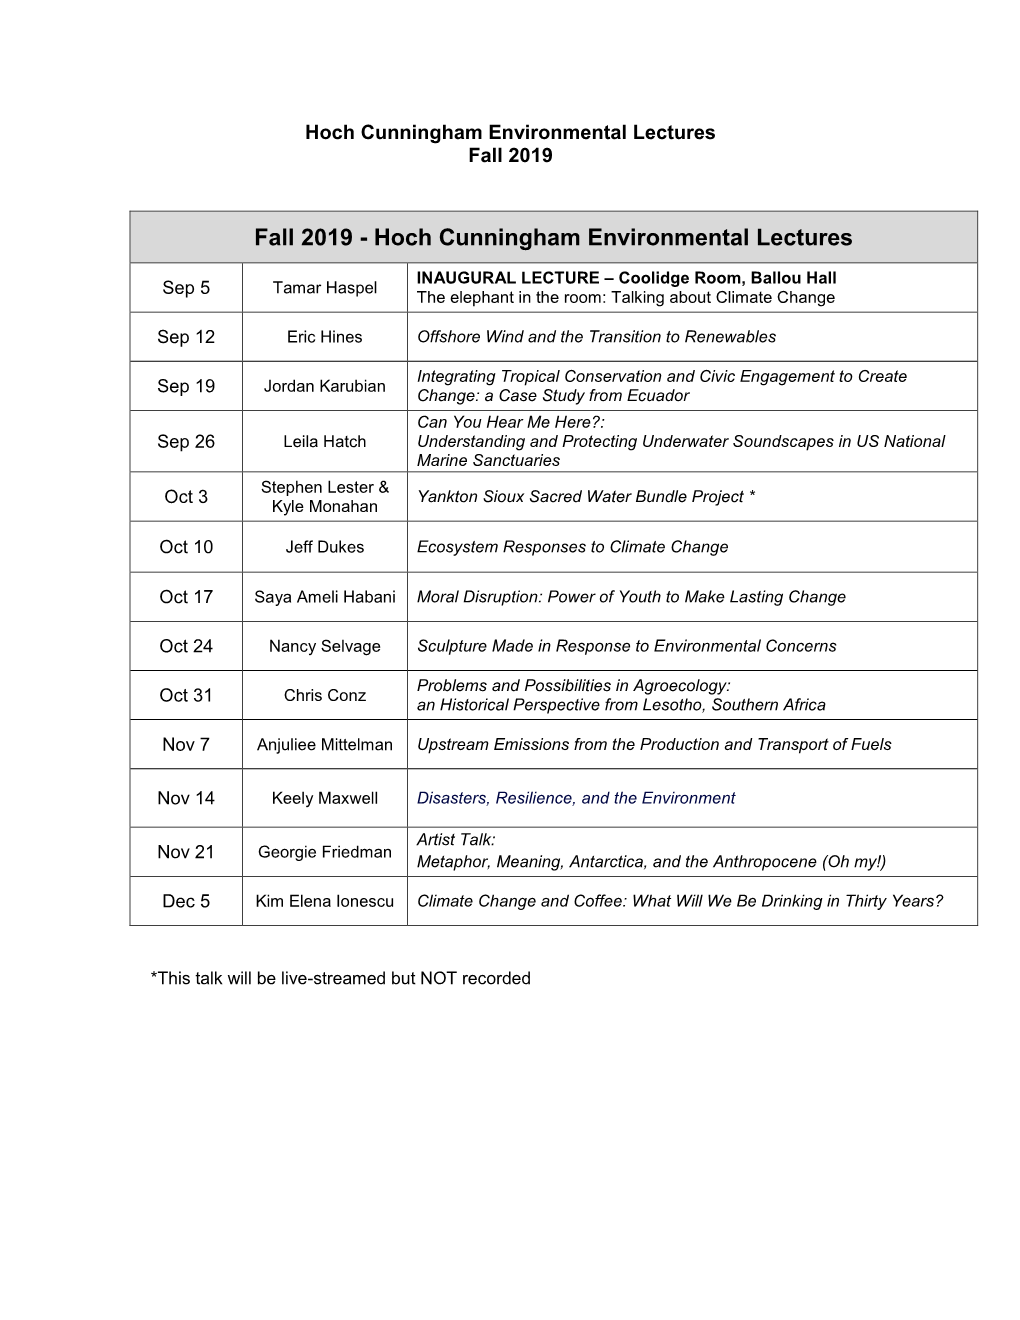 Hoch Cunningham Environmental Lectures Fall 2019